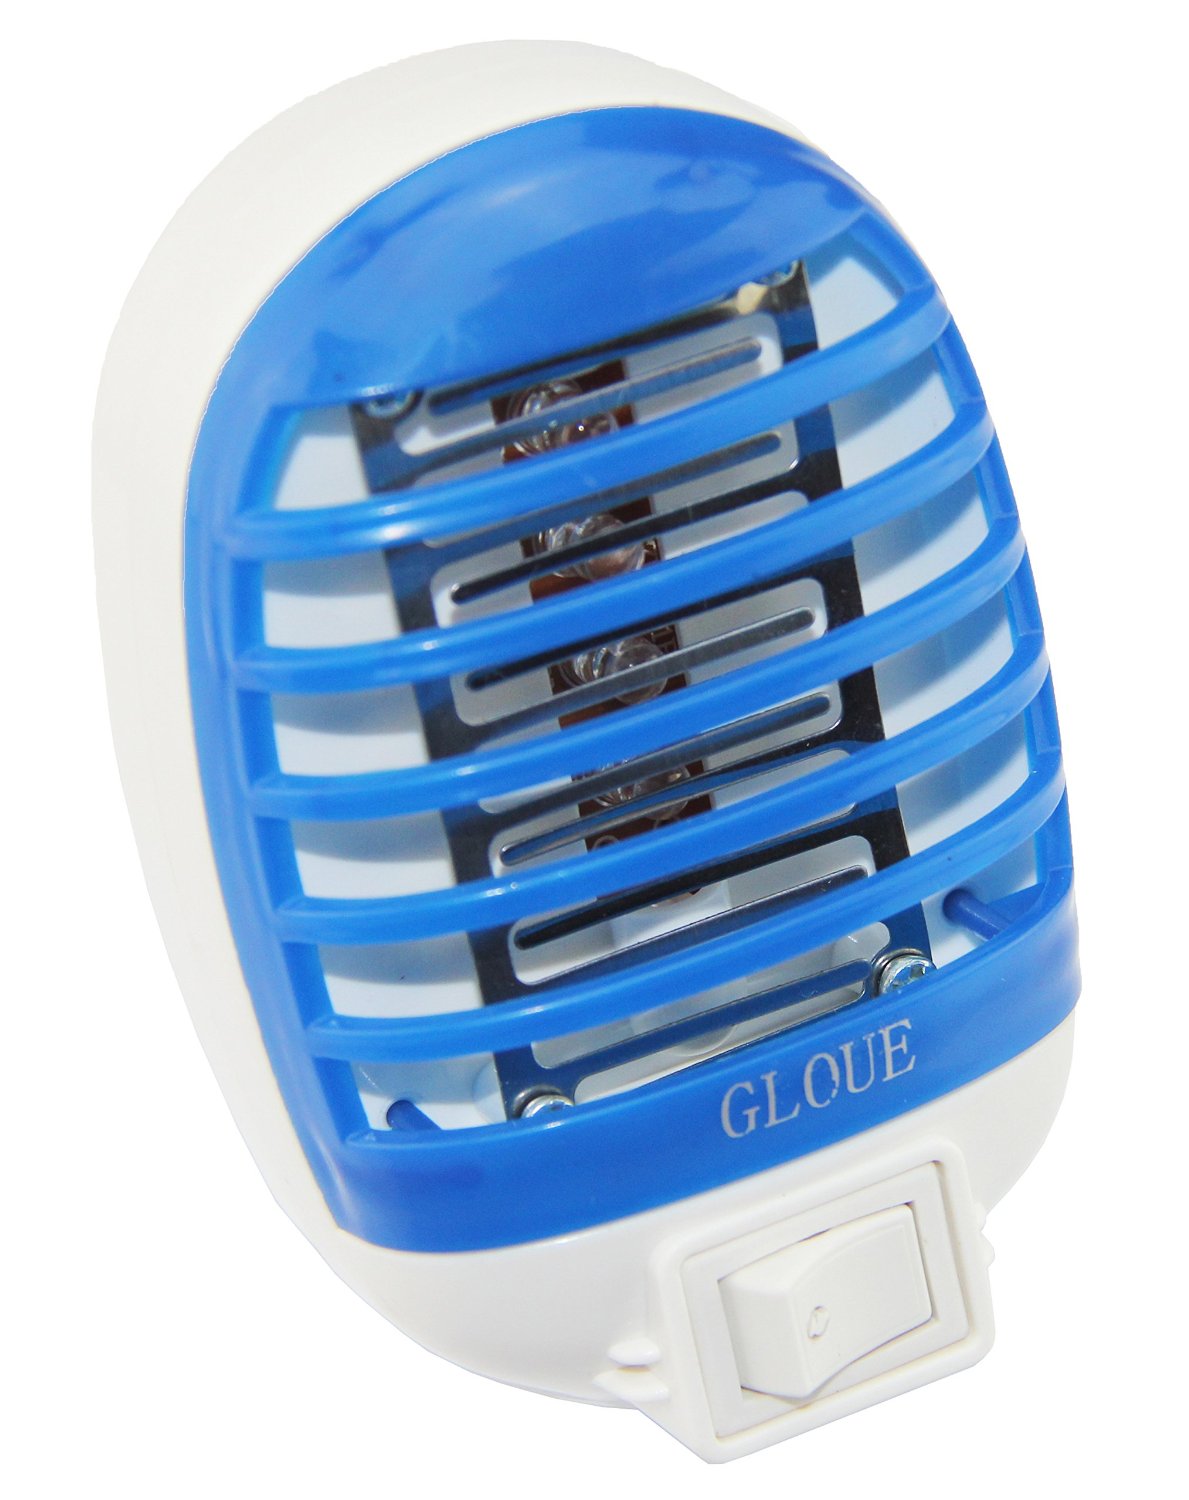 9-gloue-bug-zapper-electronic-insect-killer